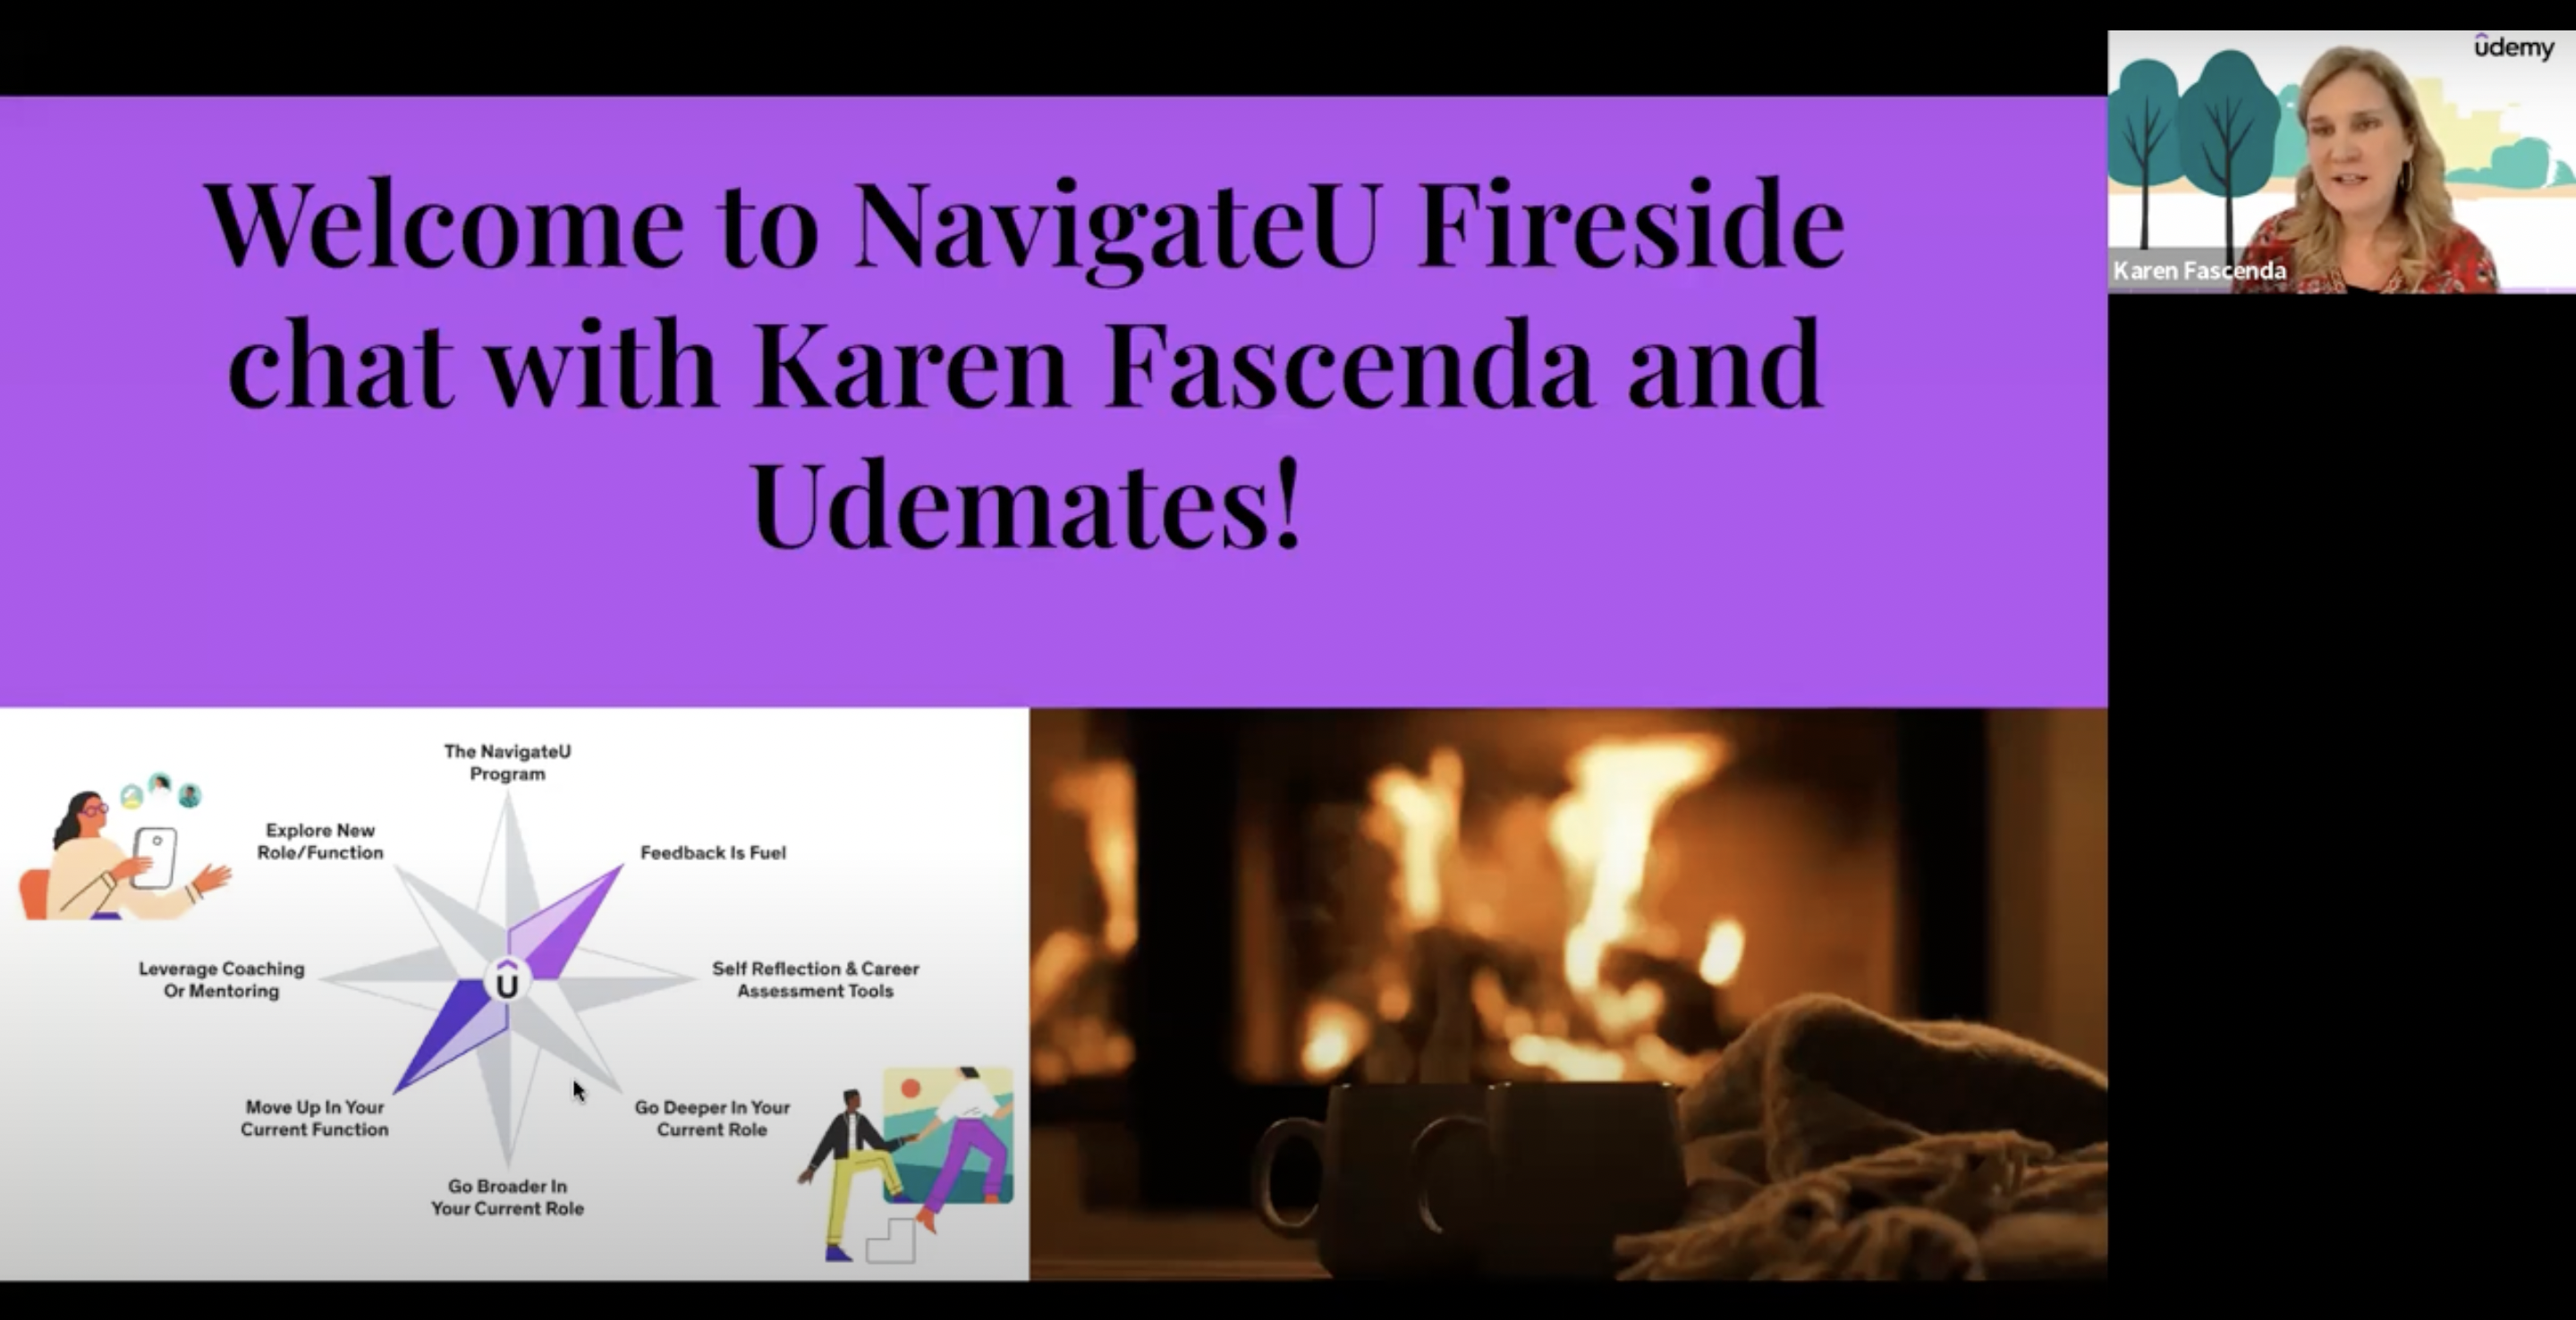 A screenshot of the Udemy Fireside Chat.